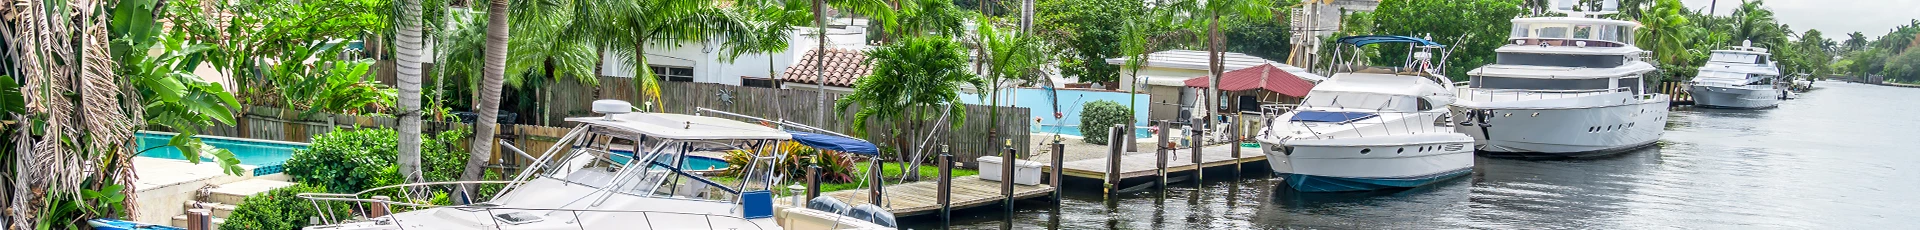 Boat Removal, Dismantle and Disposal in Kendale Lakes Florida